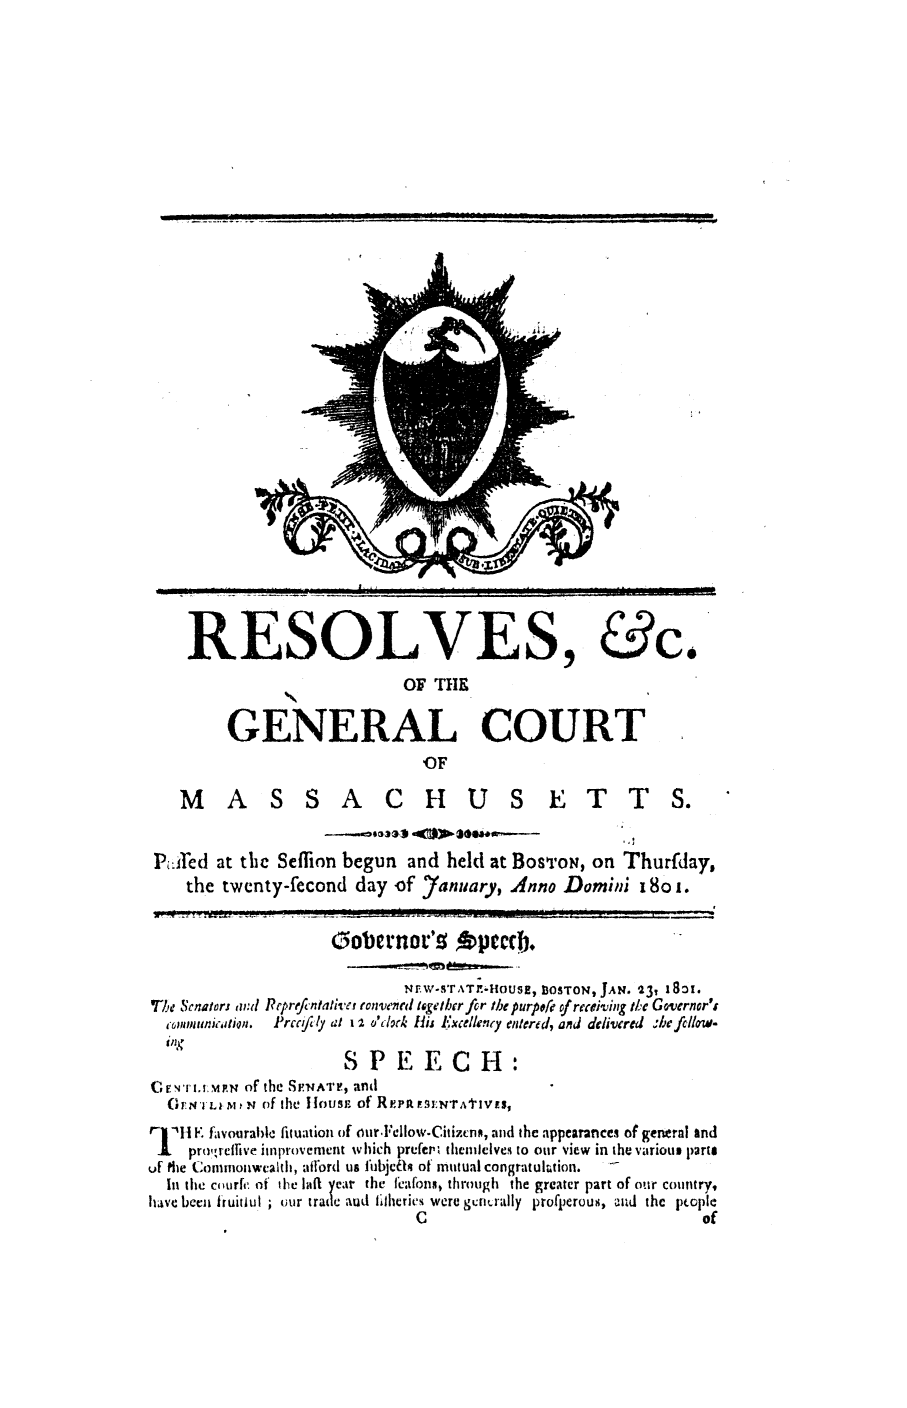 handle is hein.ssl/ssma0358 and id is 1 raw text is: RESOLVES, &c.
OF THE
GENERAL COURT
OF
M A S S A C H U S E T T S.
Pilred at the Seffion begun and held at BosToN, on Thurfday,
the twenty-fecond day of 7arnuary, anno Domini 18o .
Go1 ernor's fpeccb.
Nrw-sT,%T.-HOUs , BOSTON, JAN. 23, 1801.
T1I, Senators and ReprefJntatlive tonw'ne tligether fir the purpefe of receiving Il.c Governor'i
eommunicaion.  Prcccily al I I o'clork H1ij Excelleny entered, and dcliered .befcllow.
SPEECH:
Cr'rTI., M~vN, of the SP.N^TF, and
(F T,,vLI M I N of the 11ousp of REiPA  -ENTAtIV{S,
r   li F. favourablc fituation of our.l clow-Citizcnn, and the appearances of general and
I   pro',reflive improvement which prefe:,c themlelves to our view in the variout lprto
ur die Commonwealth, afford us IubjcTh of mutual congratultion.
In the cour, of the ha1 year the heafons through the greater part of our country,
have beca 1iuitlu ; our trade aln ilhCticS were generaily profp)erouS, cld the 1.opkC
C                                    of

I  II    Iii  IlllI I  I  I  I  l  . . . . . .. .. ... ....... .. .   II  III  |  Ill  . .. ..


